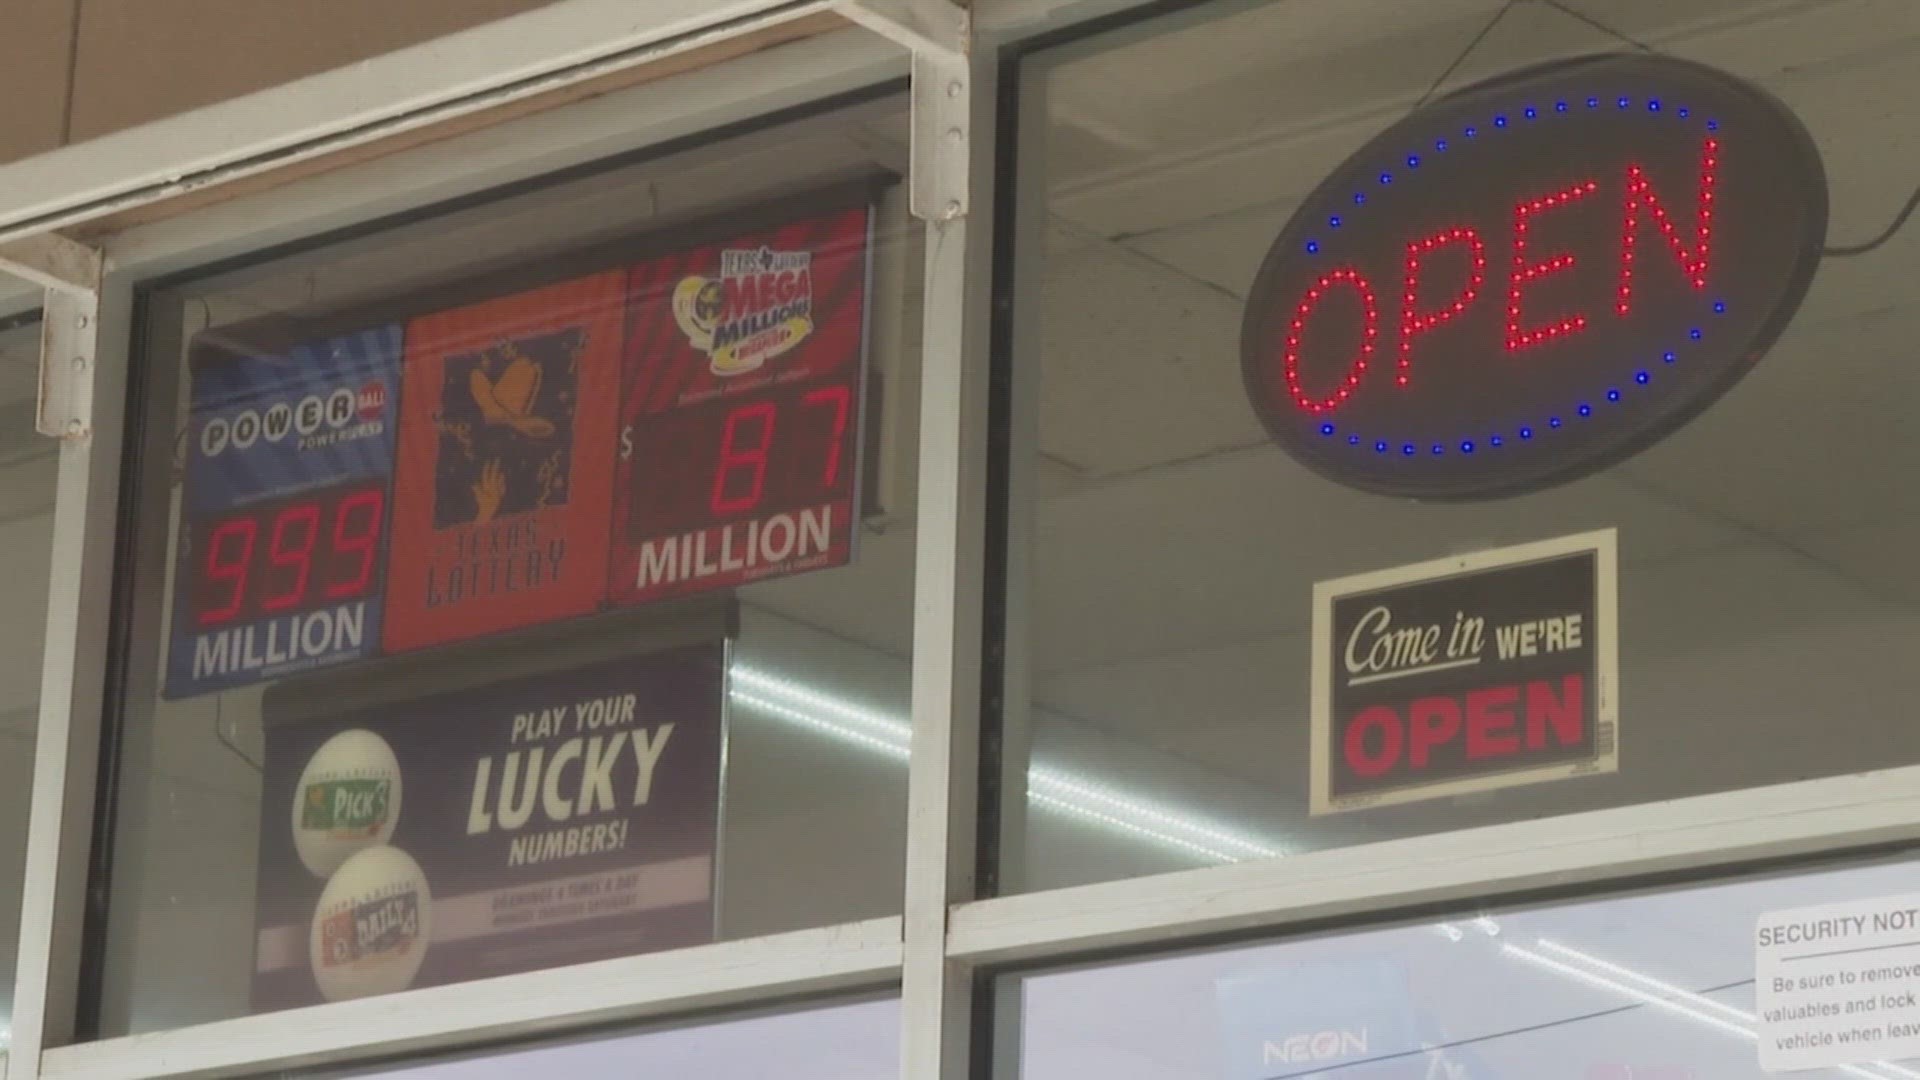 The Texas Lottery said the winning ticket was sold in Colleyville, Texas.